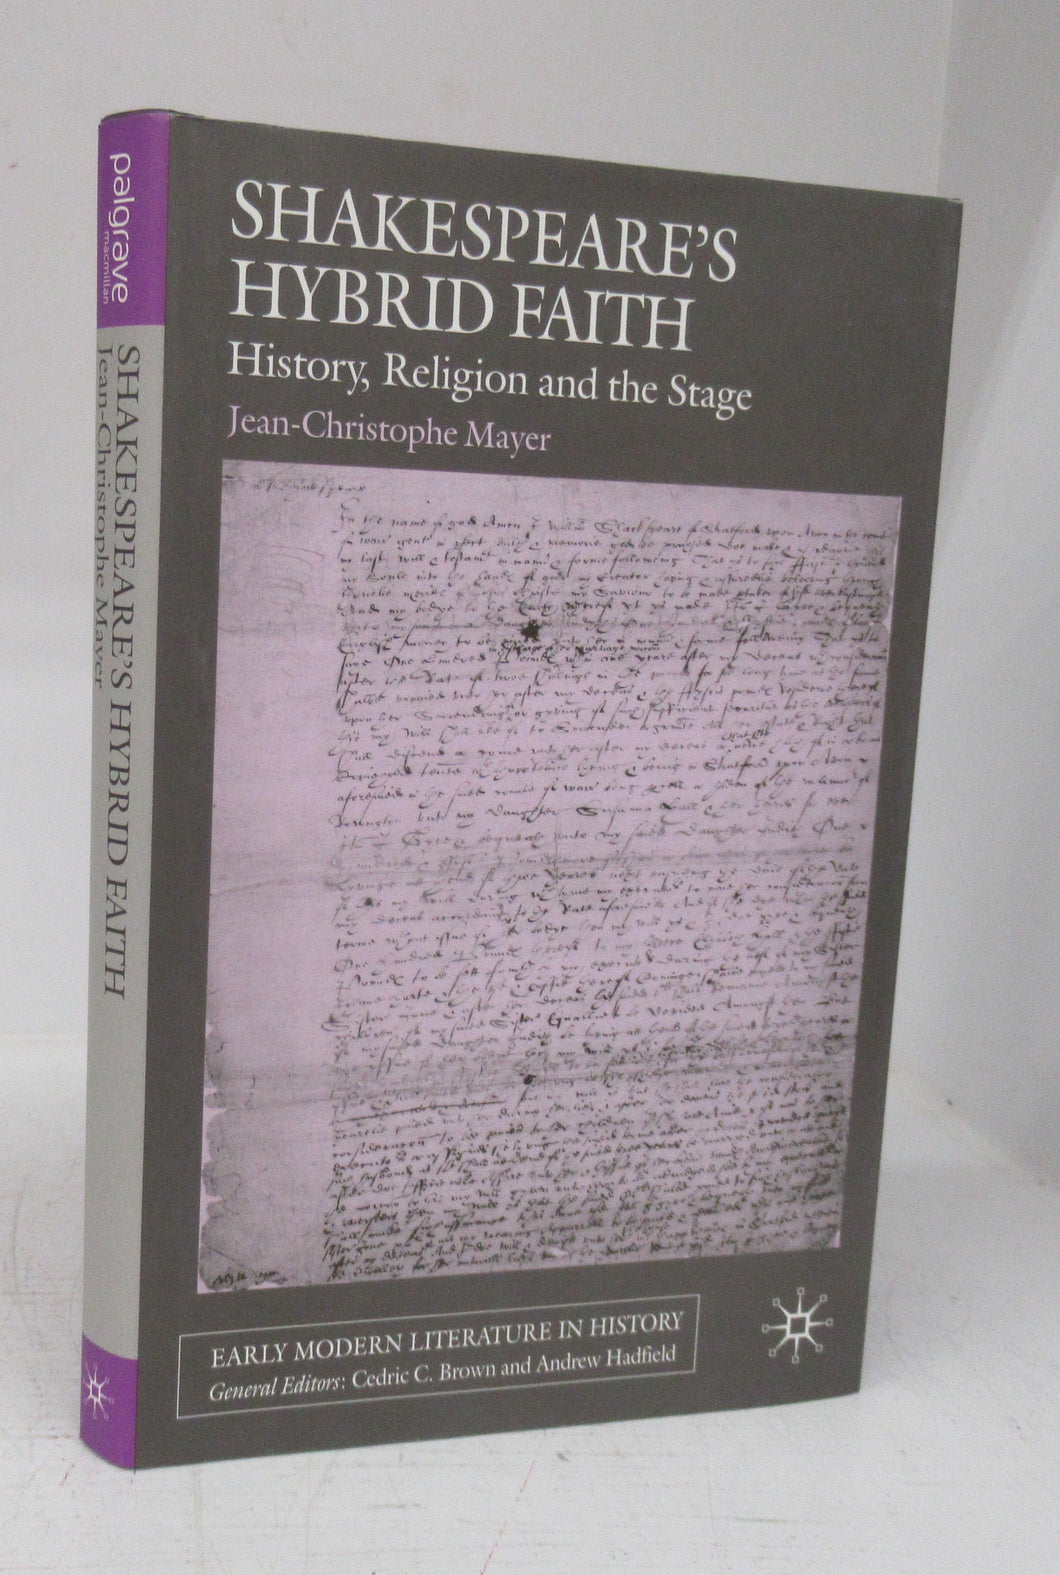 Shakespeare's Hybrid Faith: History, Religion and the Stage